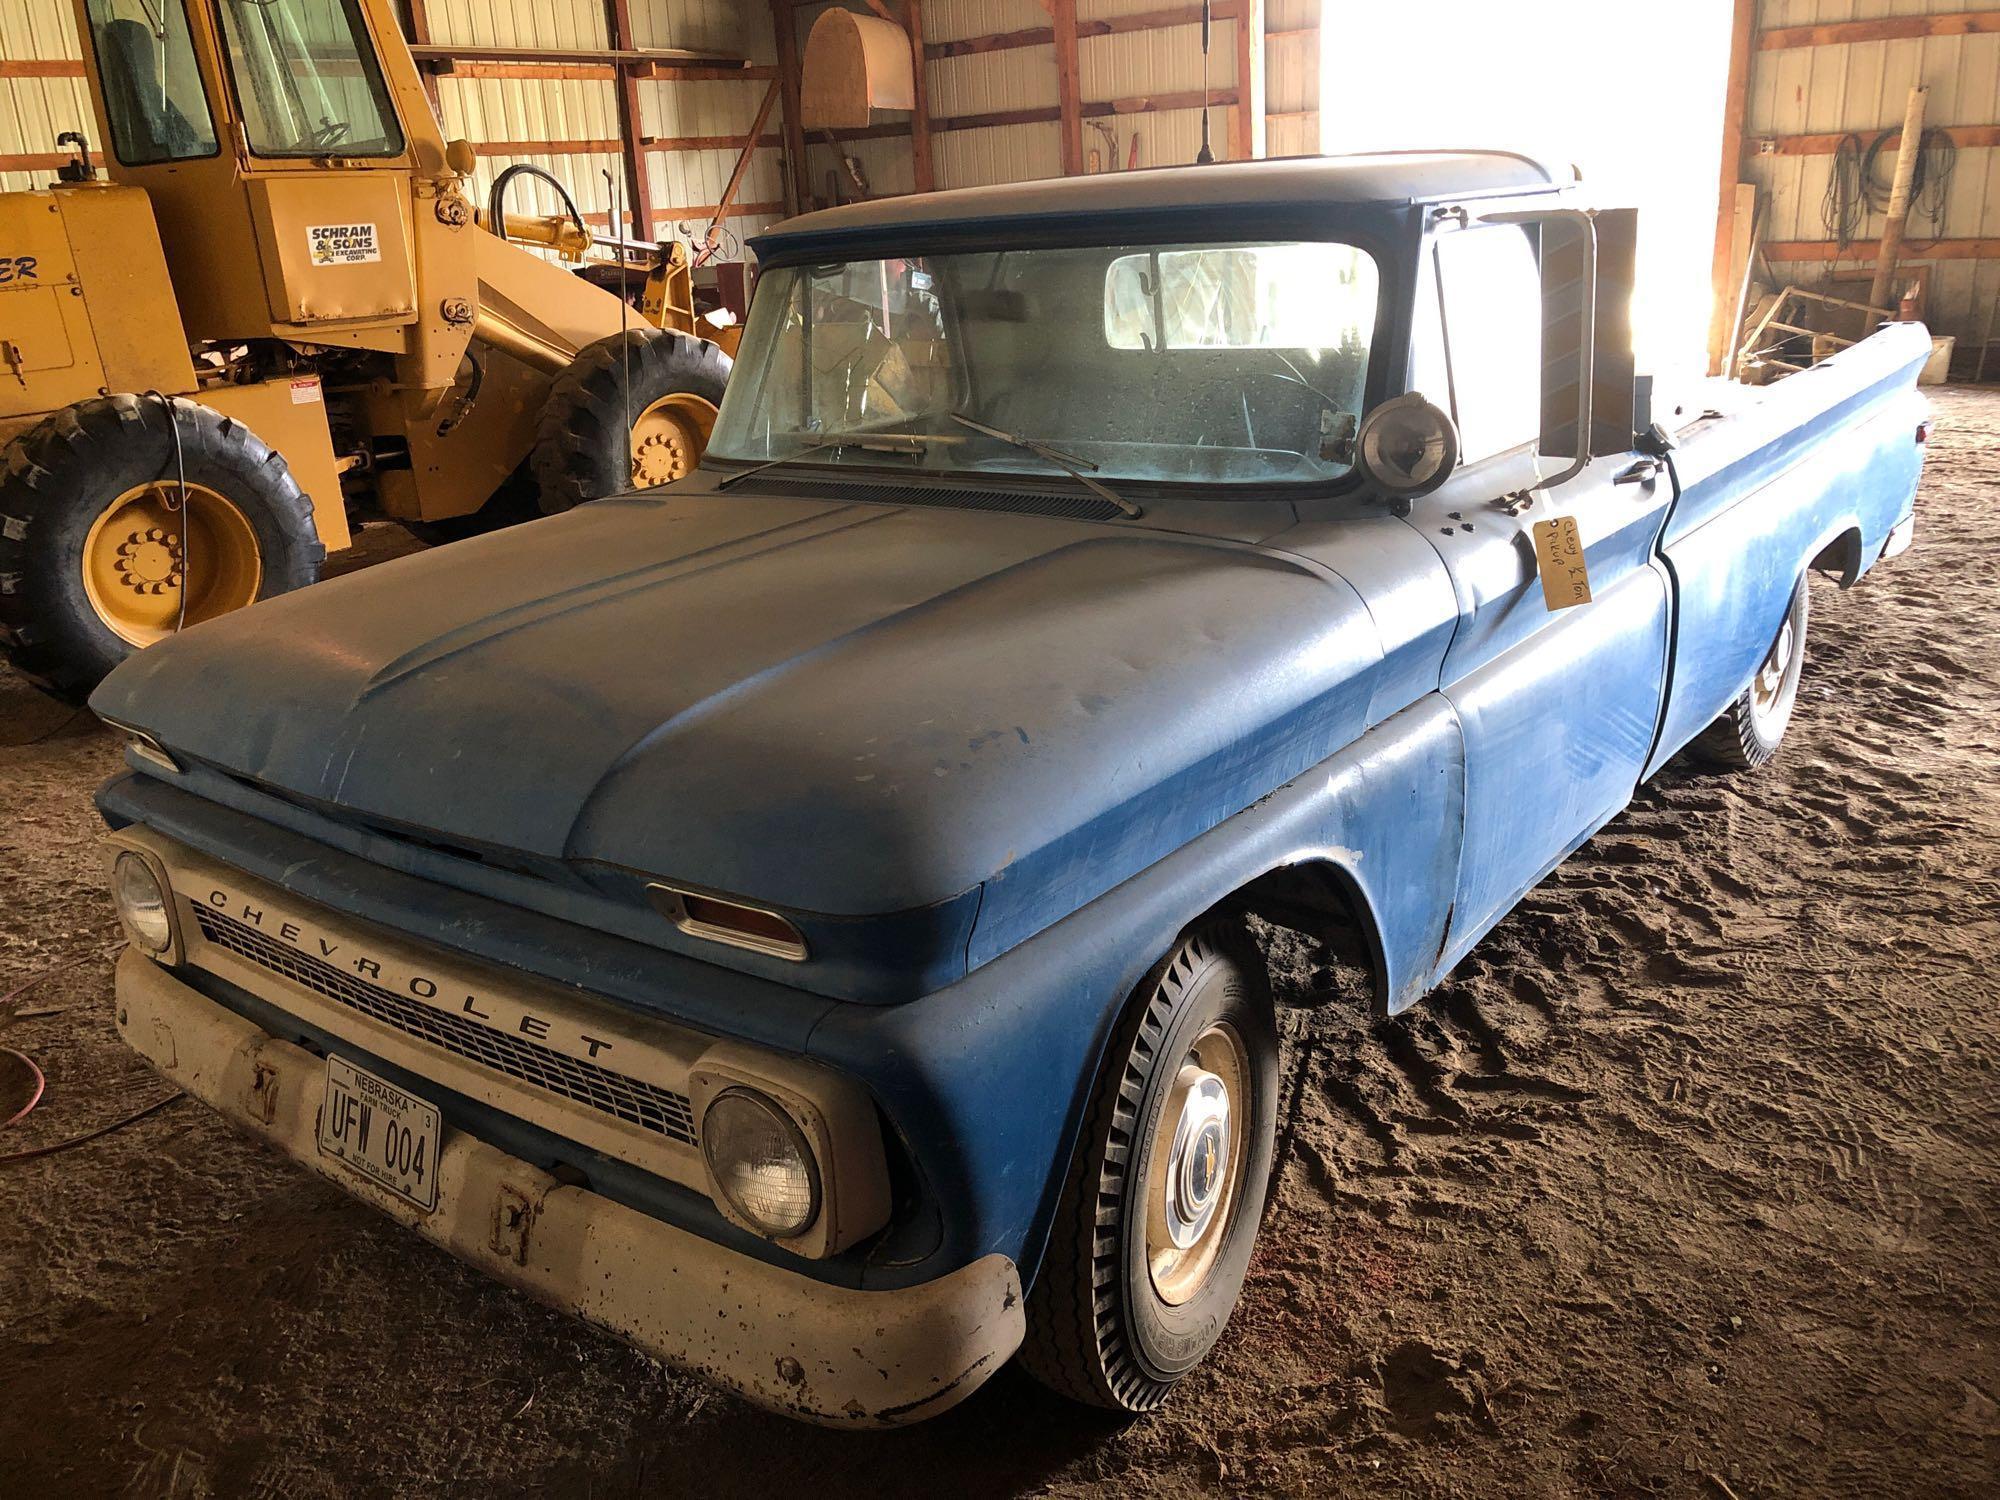 1966 Chevrolet 1/2 Ton Pickup, Gas, 42,064 Miles, Same owner last 36 years!